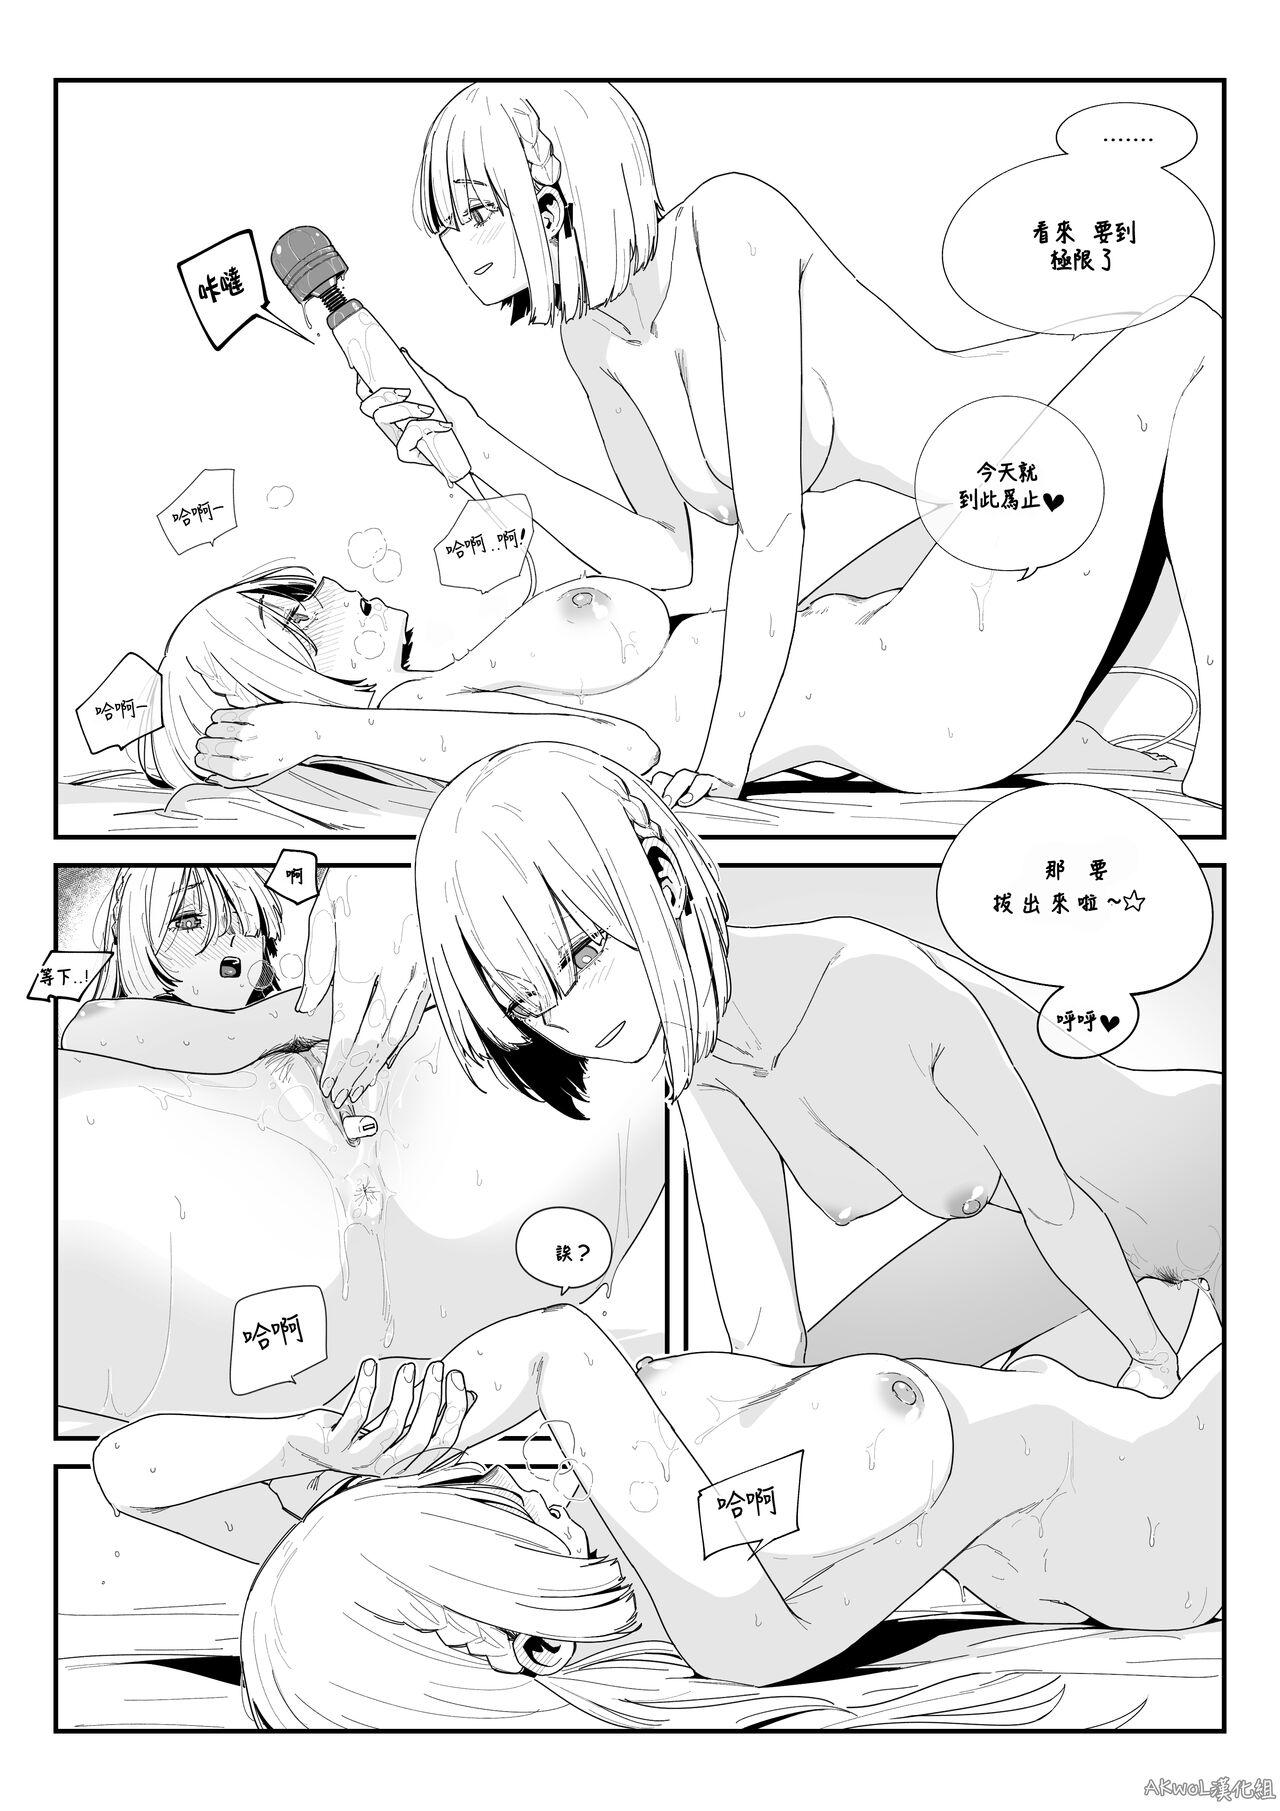 Bigbooty Crazy Dog Master 2 - Girls frontline Thick - Page 12